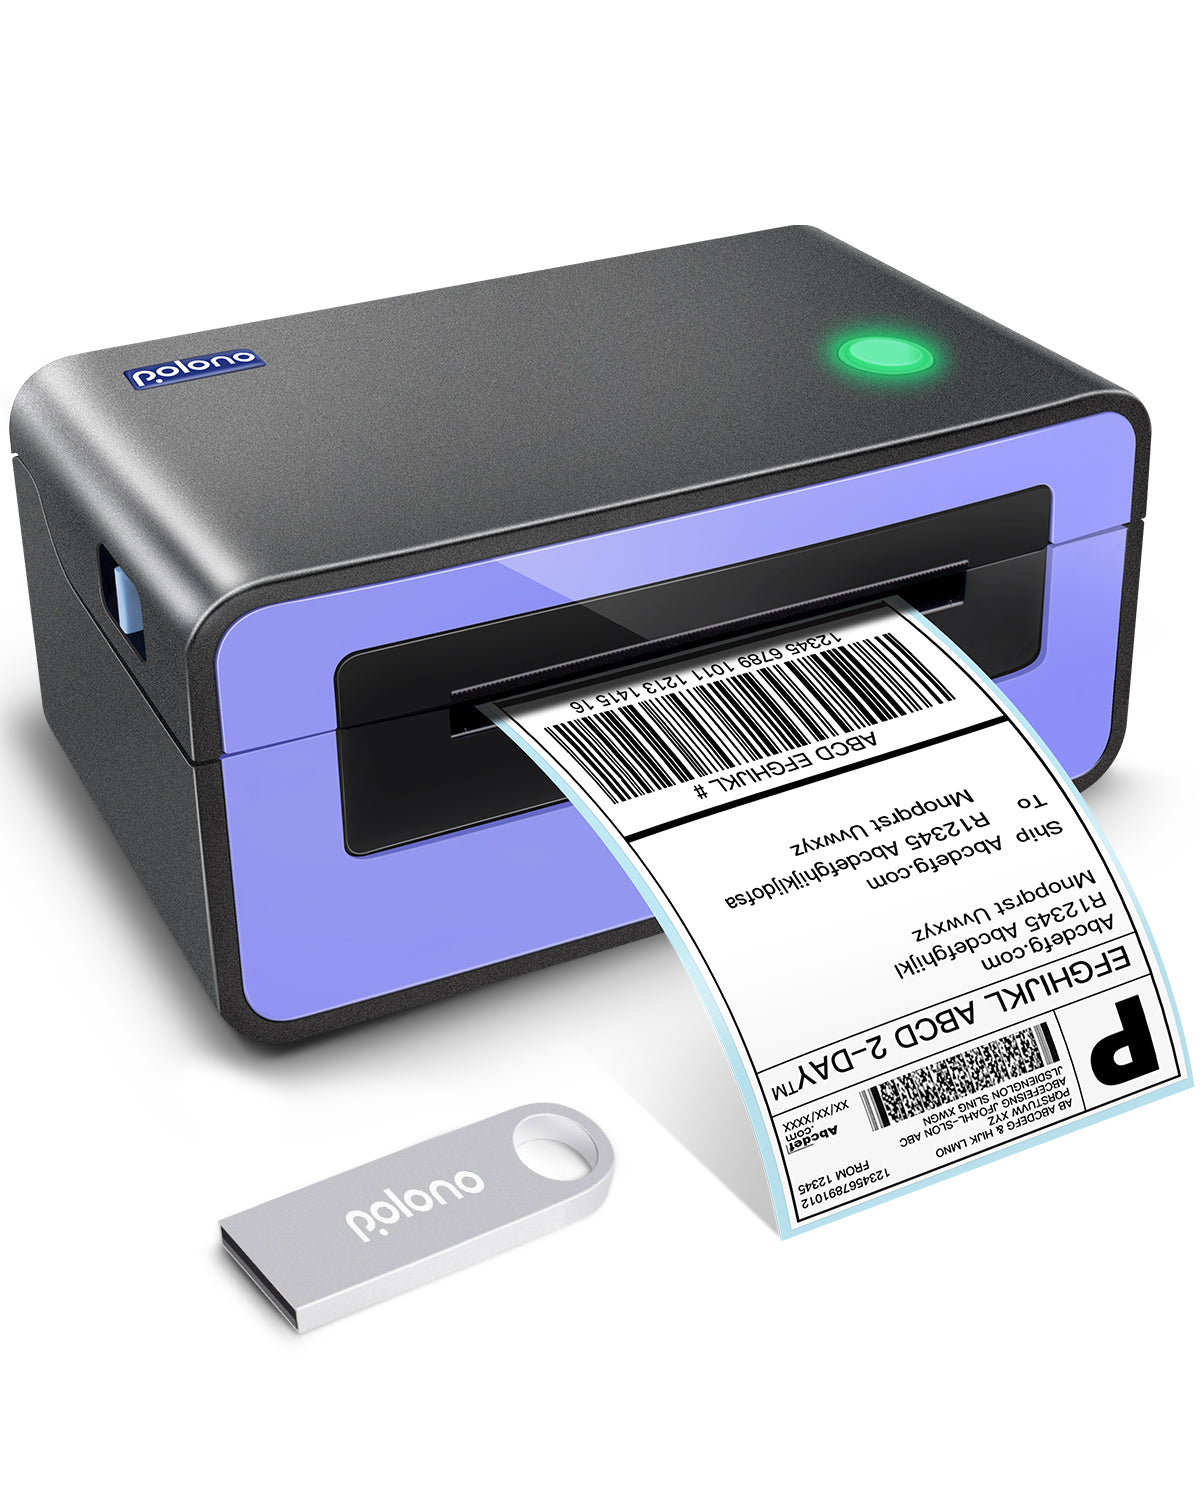 MUNBYN's New Label Printers Offer Bluetooth Or Apple AirPrint